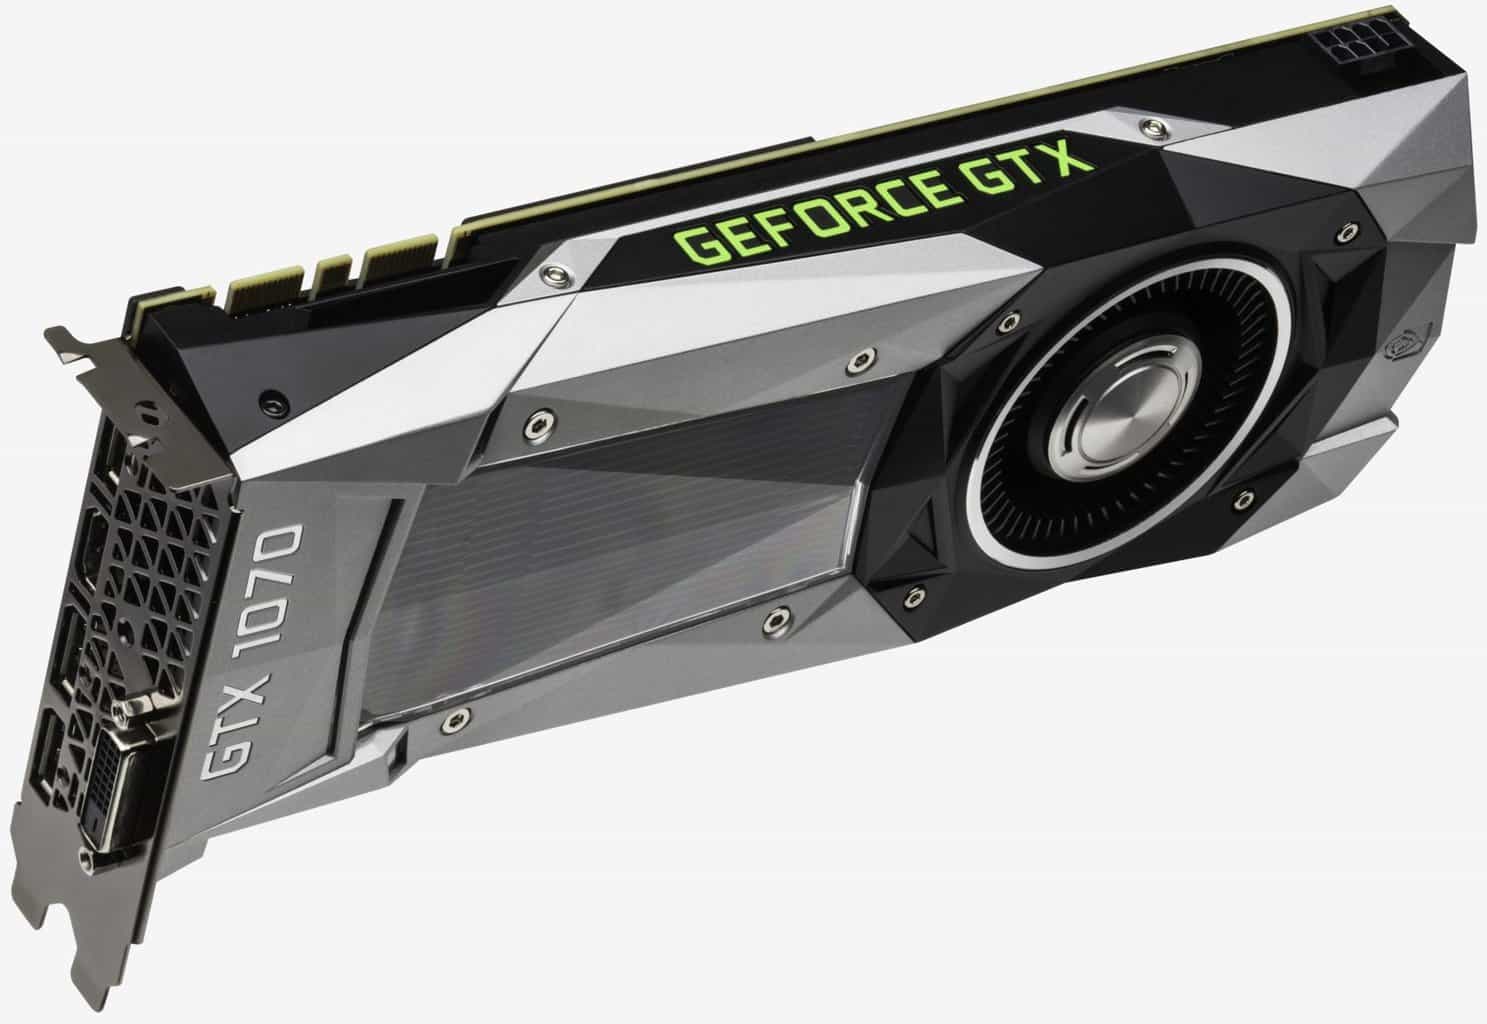 NVIDIA releases the ultimate graphics cards to smash competition